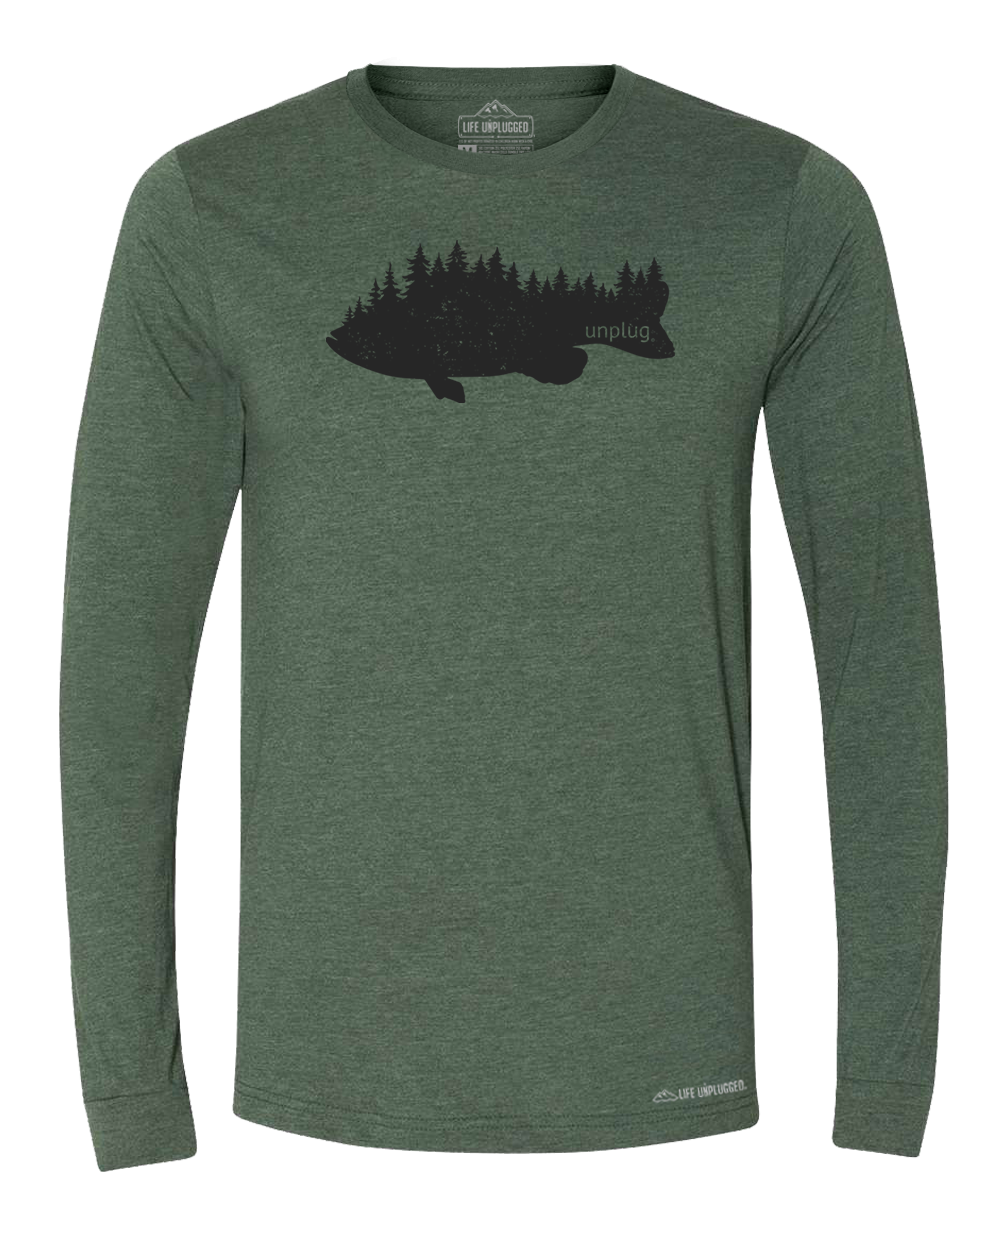 Bass In The Trees Premium Polyblend Long Sleeve T-Shirt